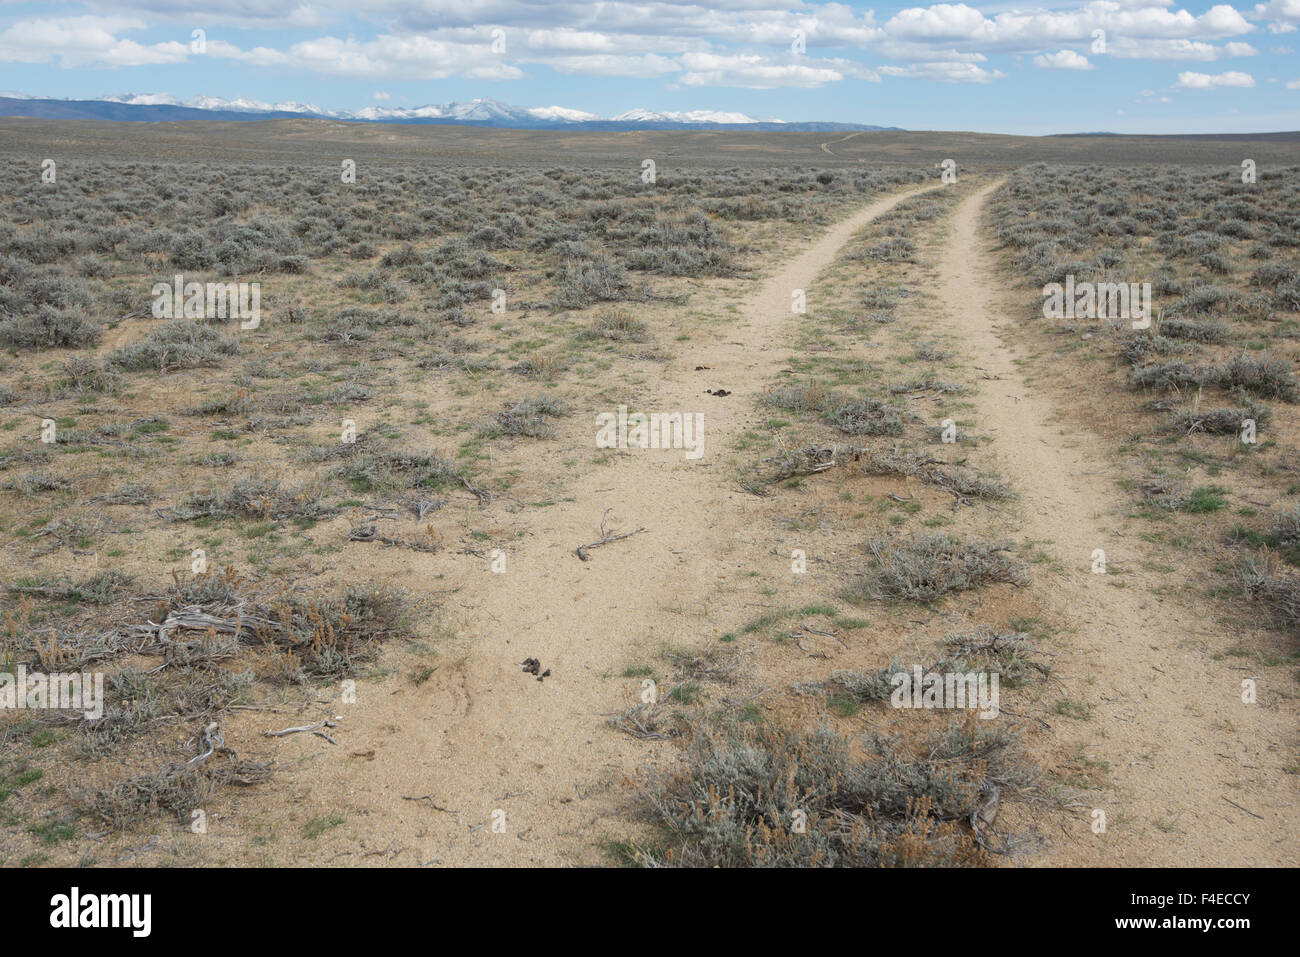 The Lander Cut-off trail, a section of the Oregon Trail, at Sand Springs, Wyoming, where it crosses Hwy 191, with the Wind River Range in the background. (Large format sizes available) Stock Photo